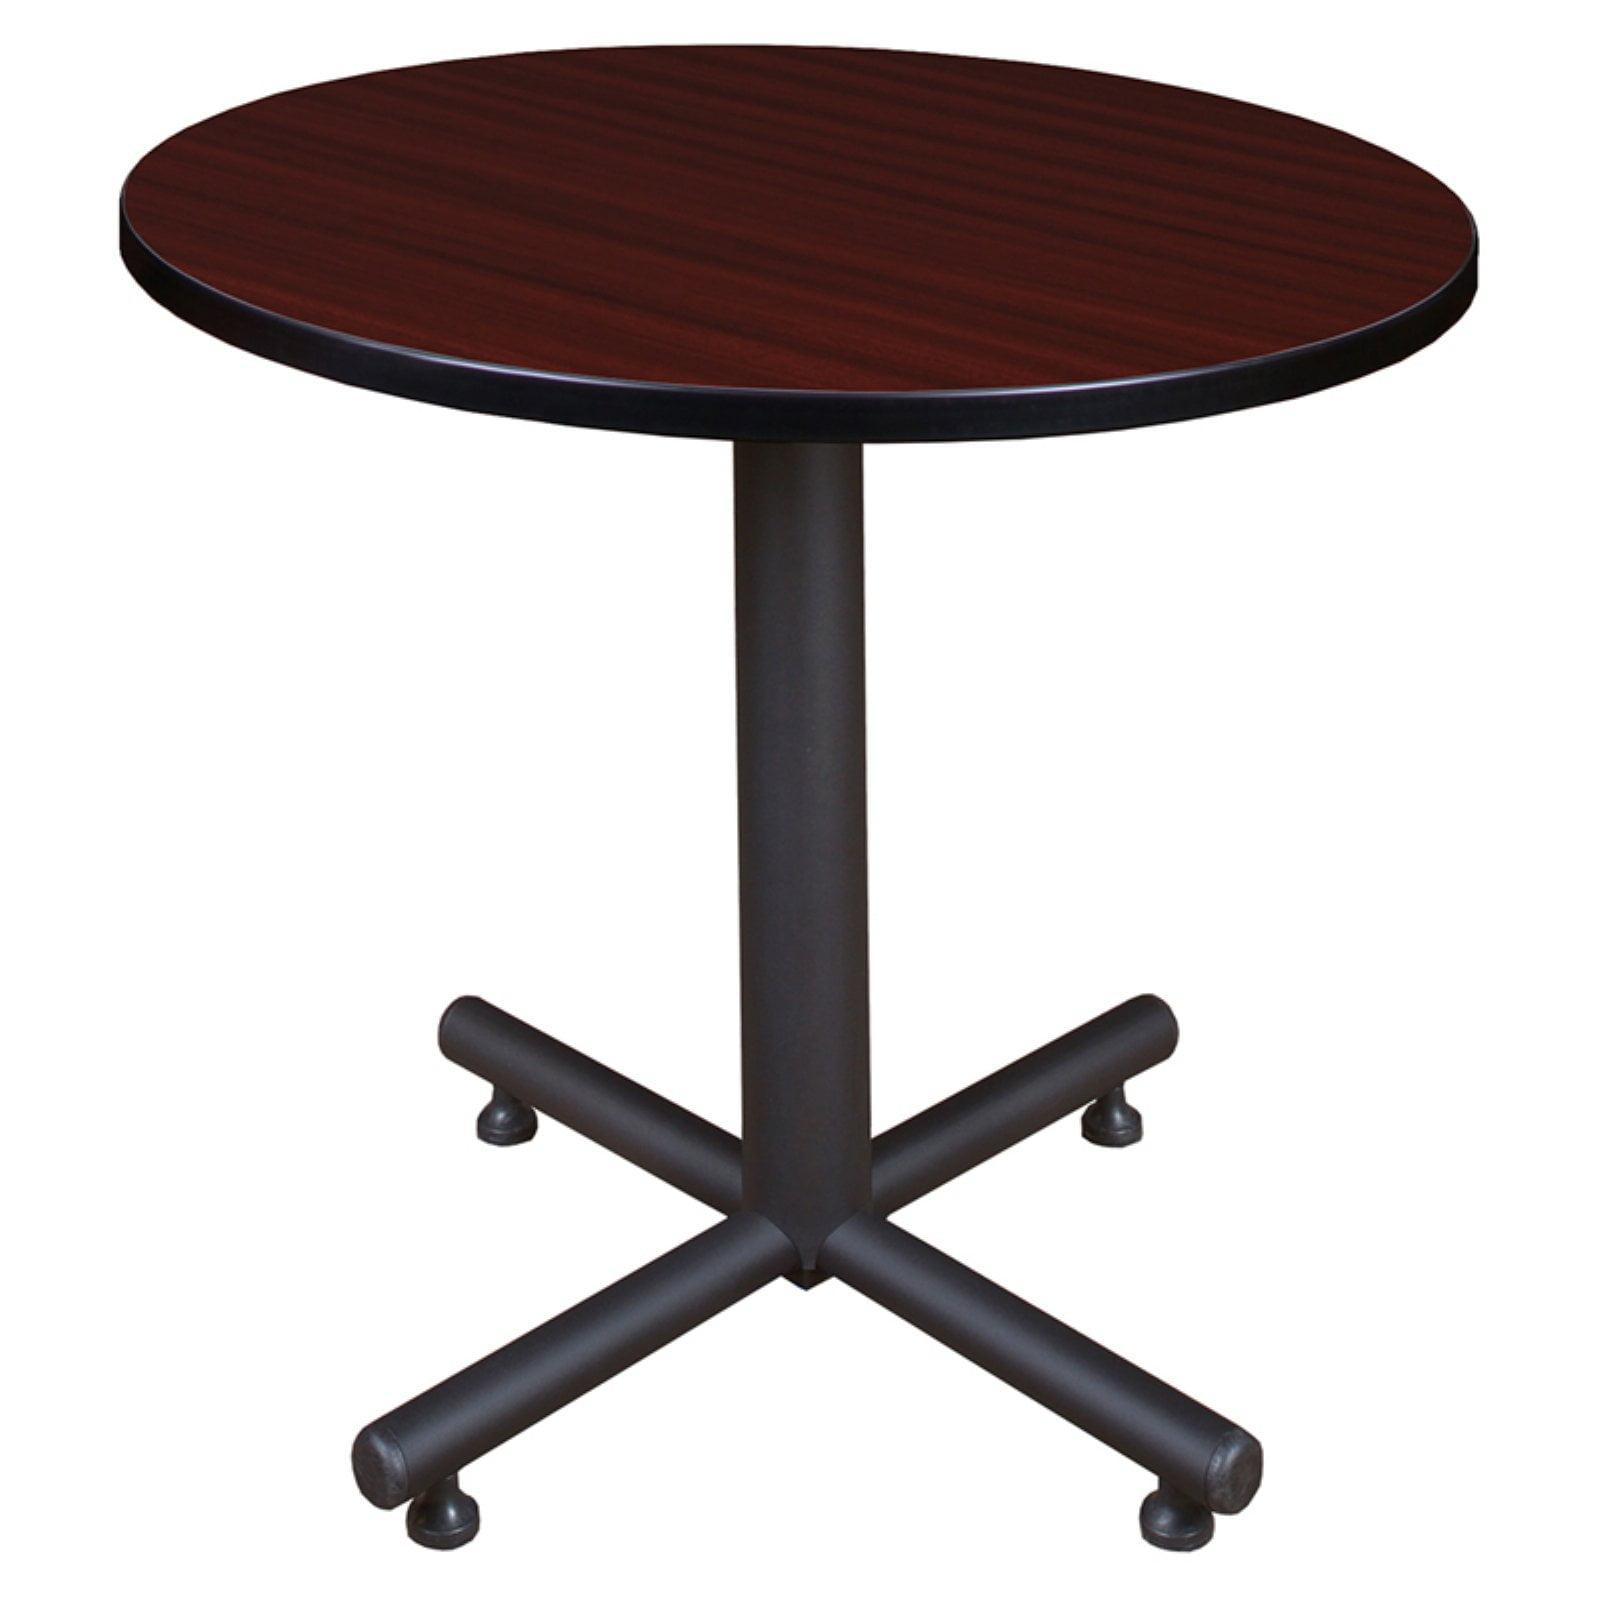 Modern Mahogany 48" Round Dining Table with Metal Base